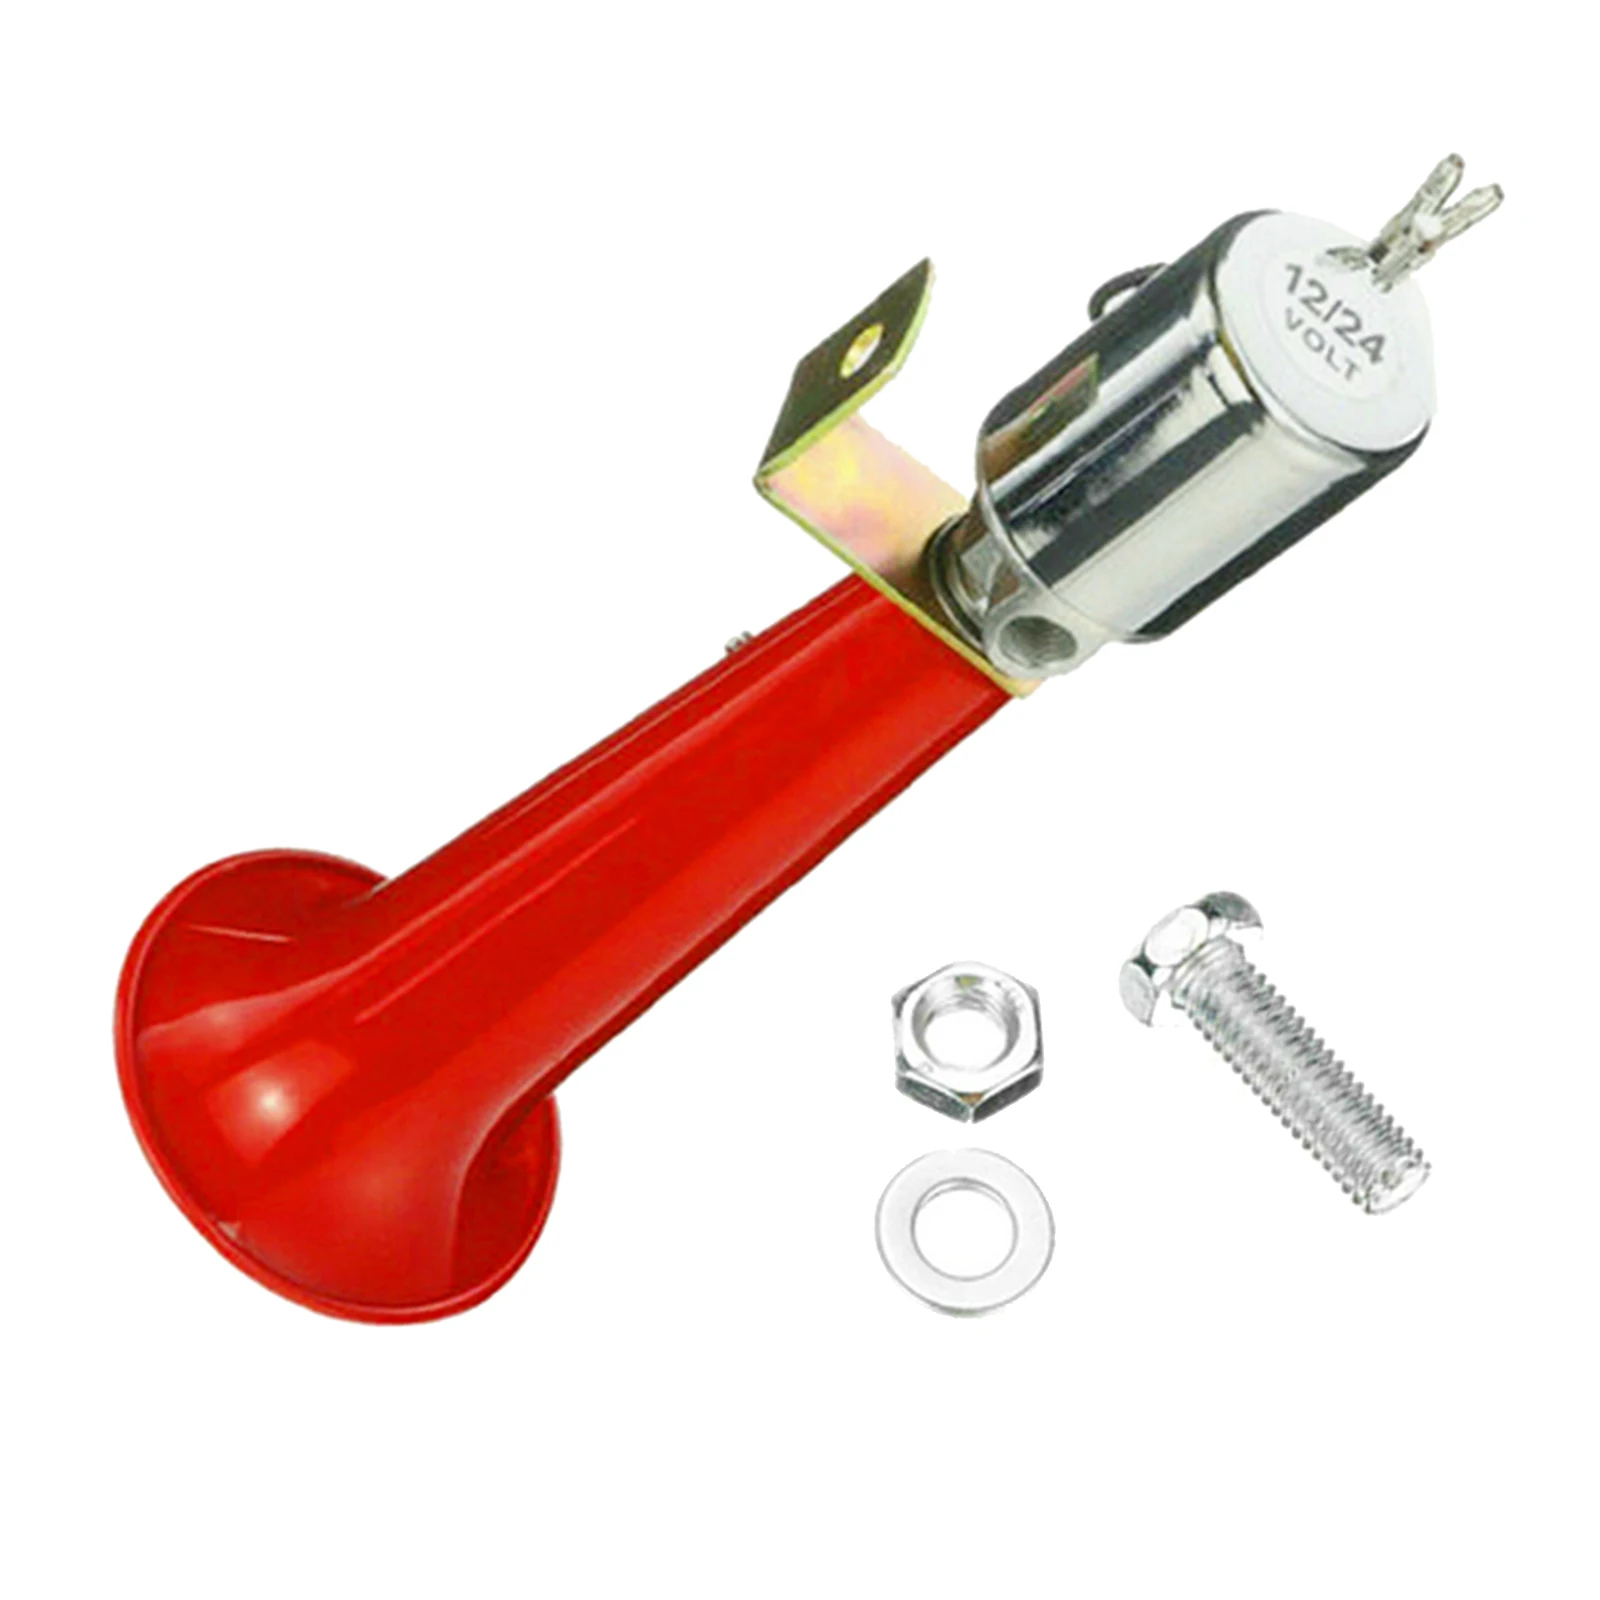 Super Loud 12/24V 180db Air Horn 10 Inches Single Trumpet for Any 12V / 24 V Vehicles Lorrys Trains SUV Motorcycle